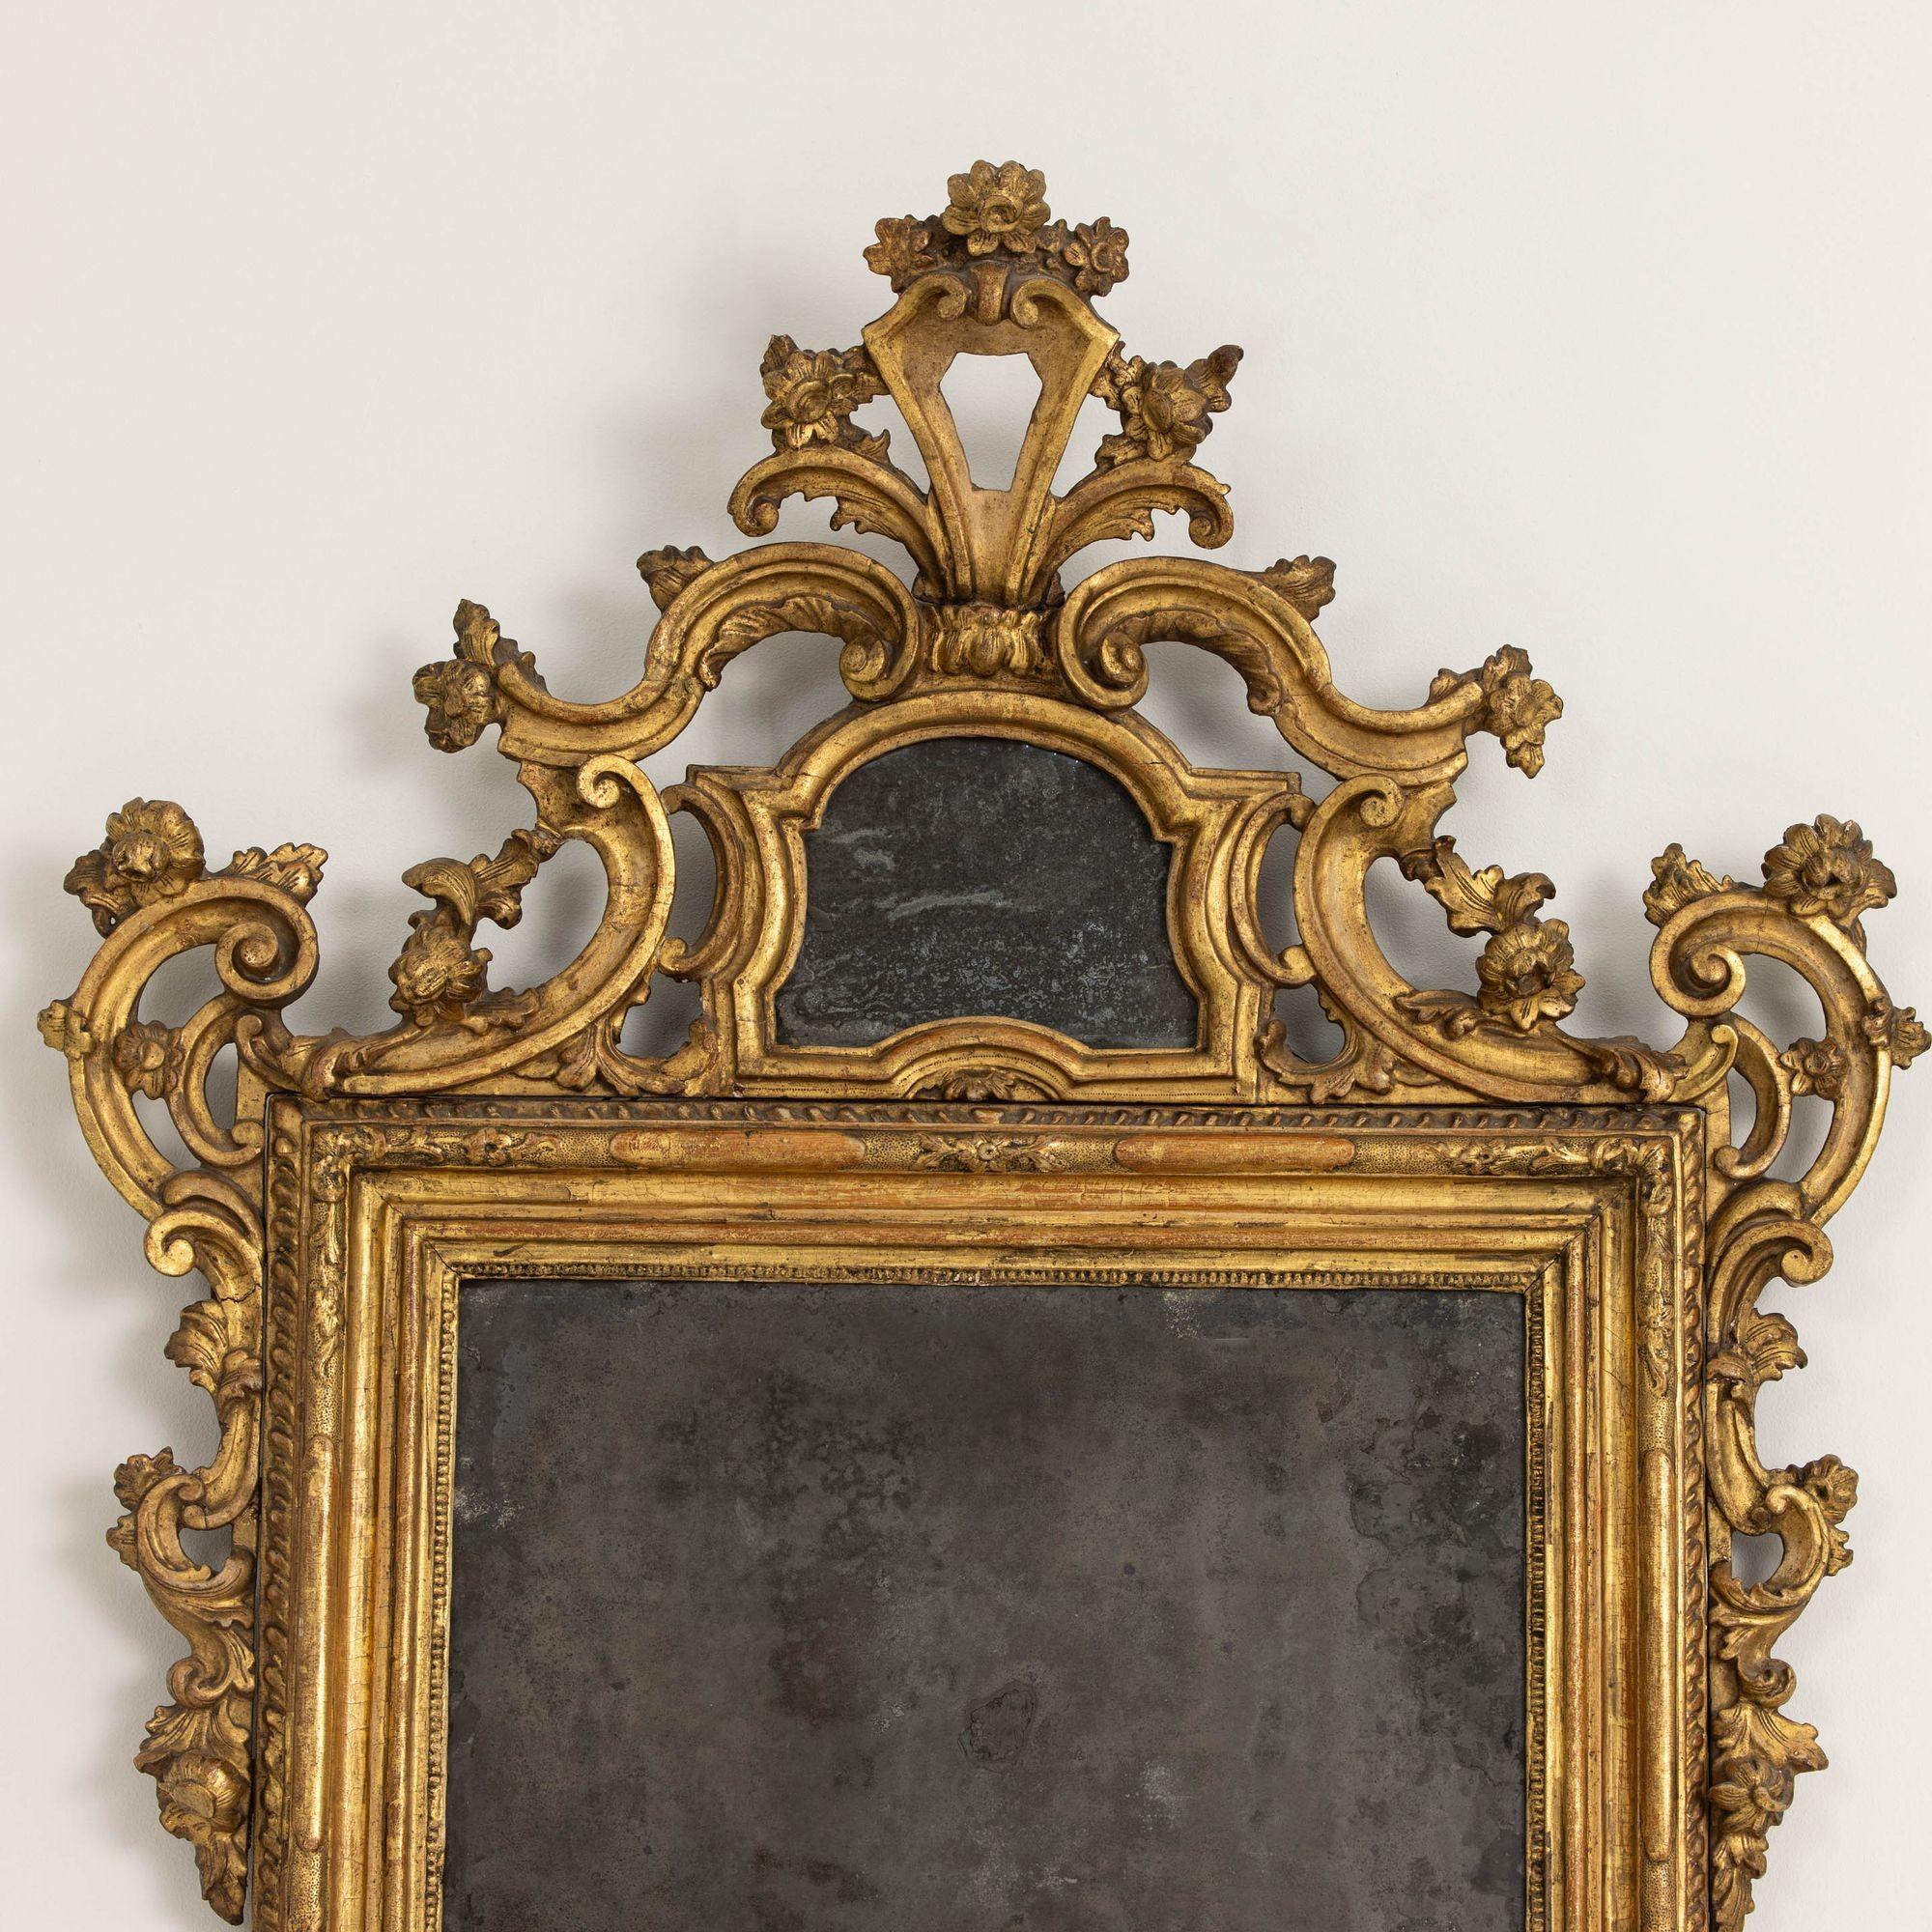 Hand-Carved 18th c. Italian Baroque Mirror in Original Giltwood with Original Mirror Plates For Sale